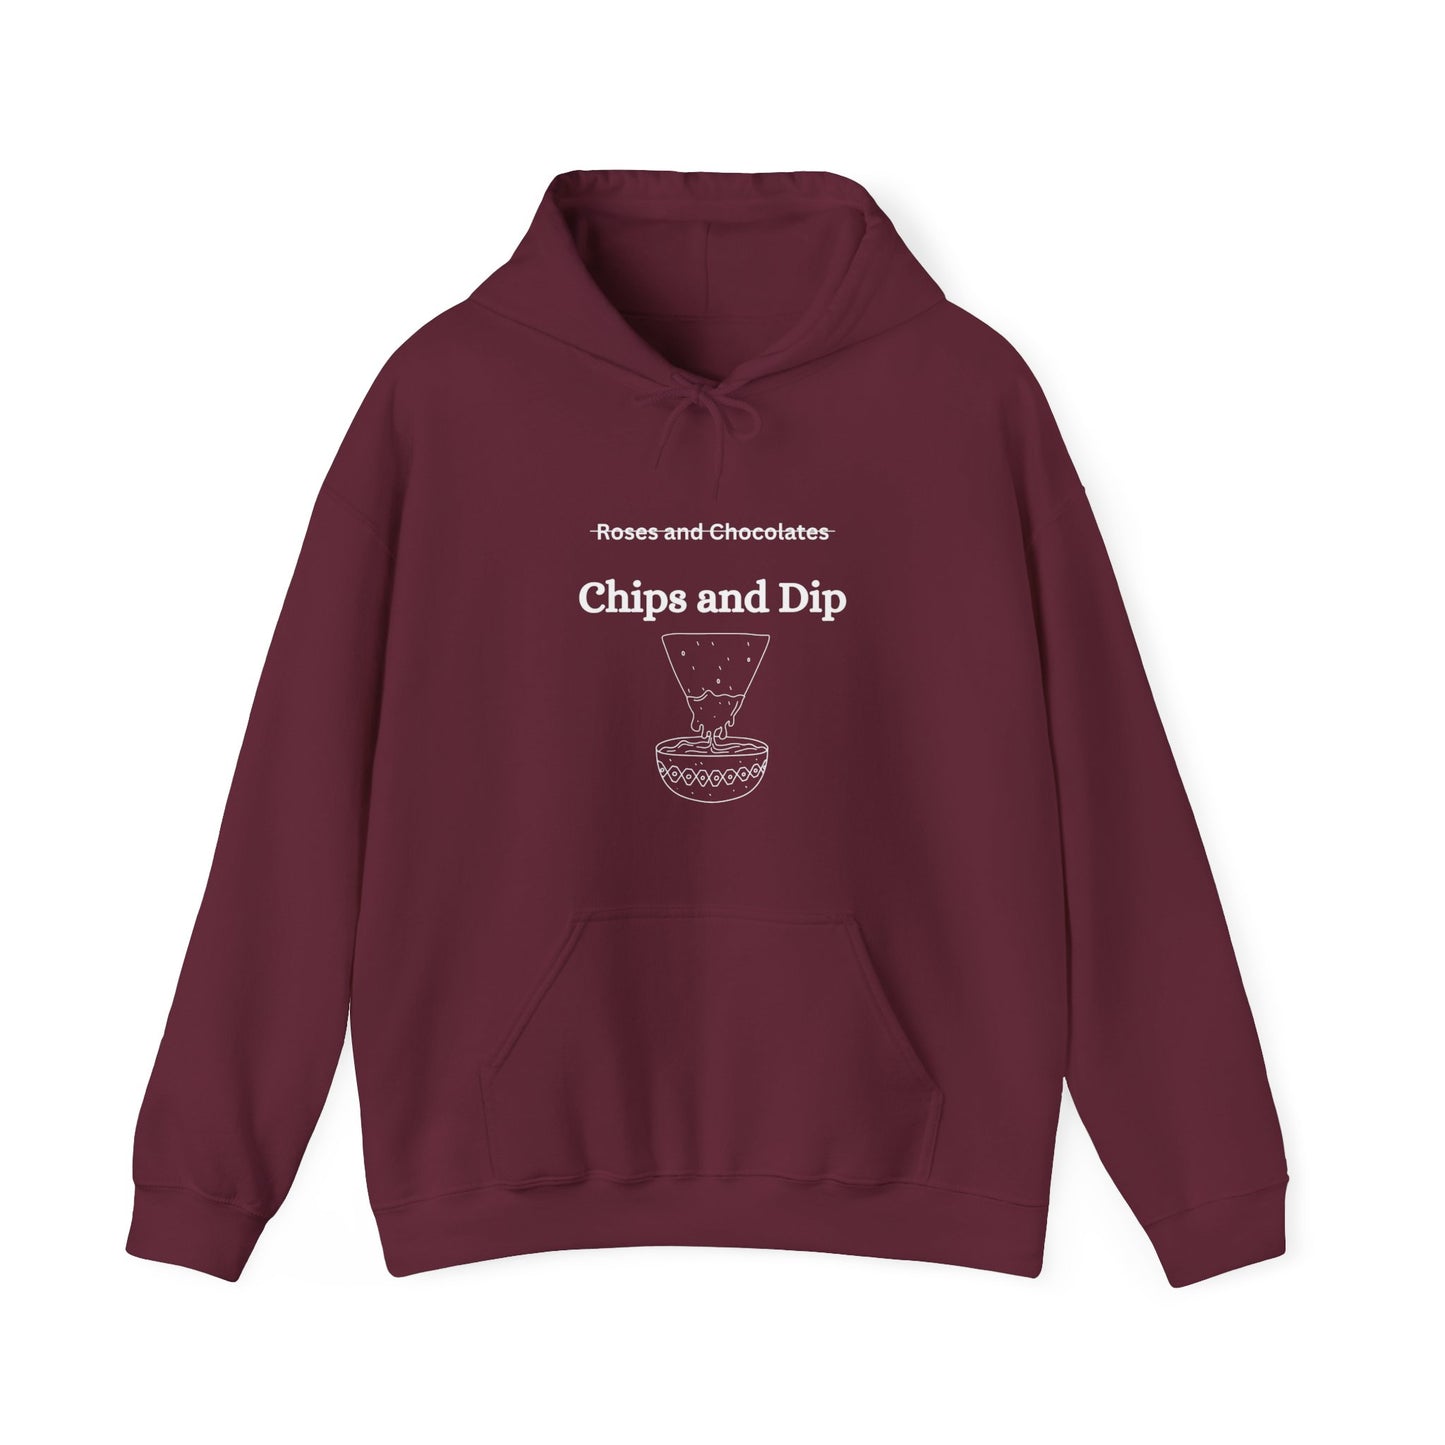 Chips and Dip Funny Valentine's Day Hooded Sweatshirt